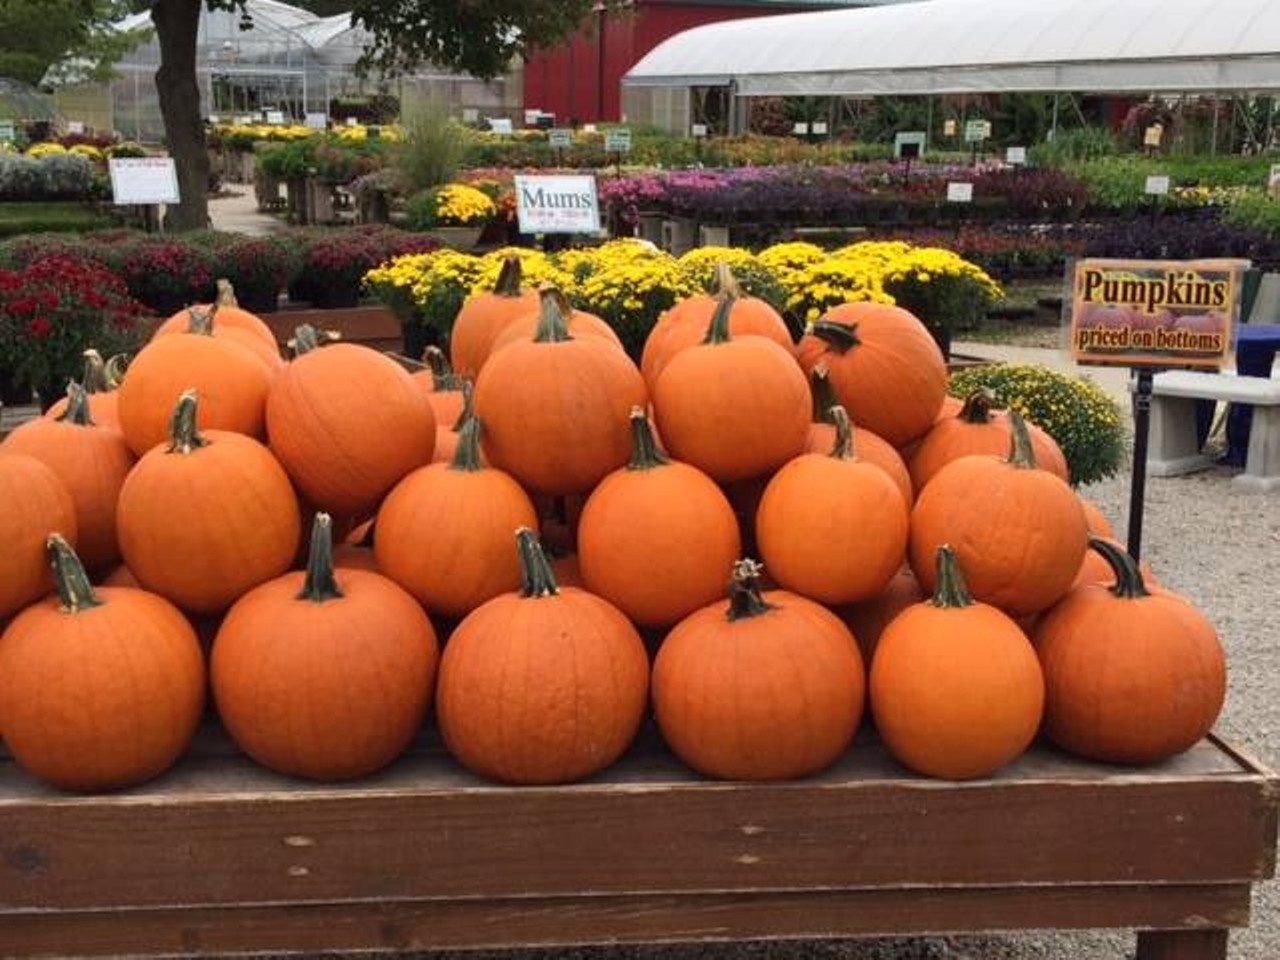 15 Fall Fests to Hit in Northeast Ohio This Season